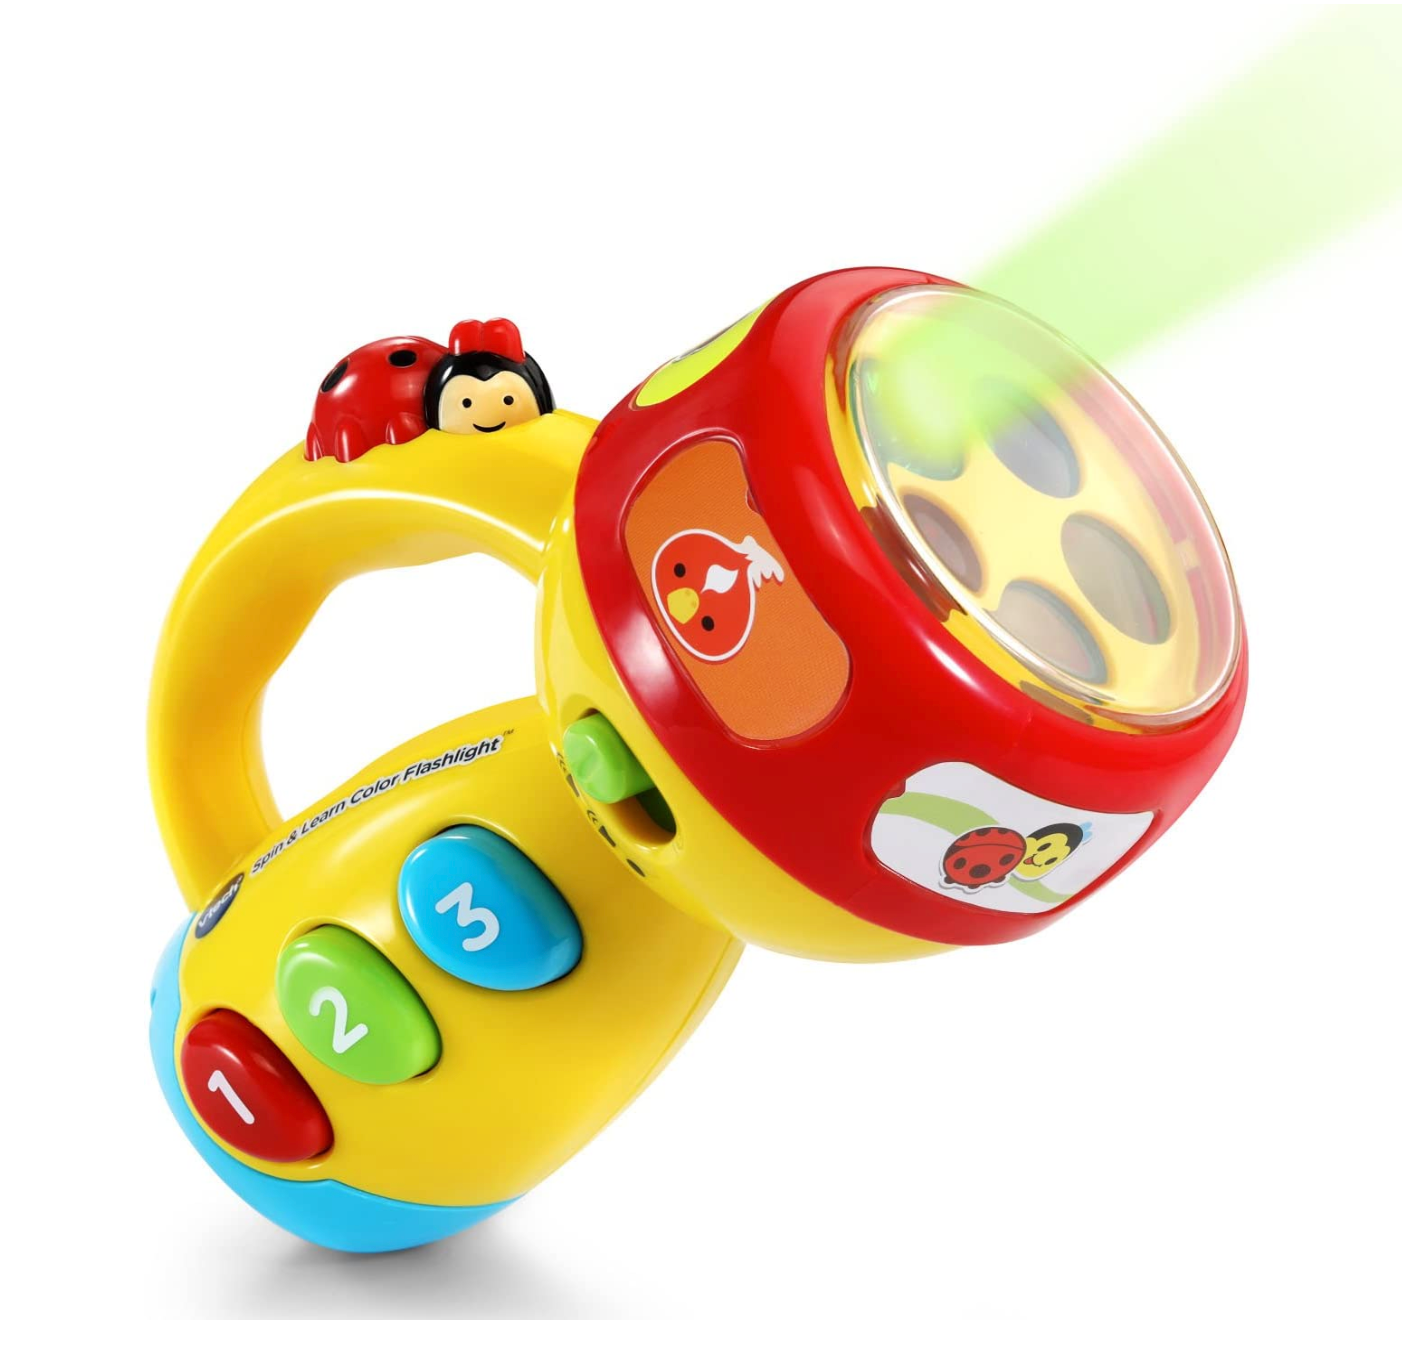  ĐÈN VTECH SPIN AND LEARN COLOR - YELLOW 